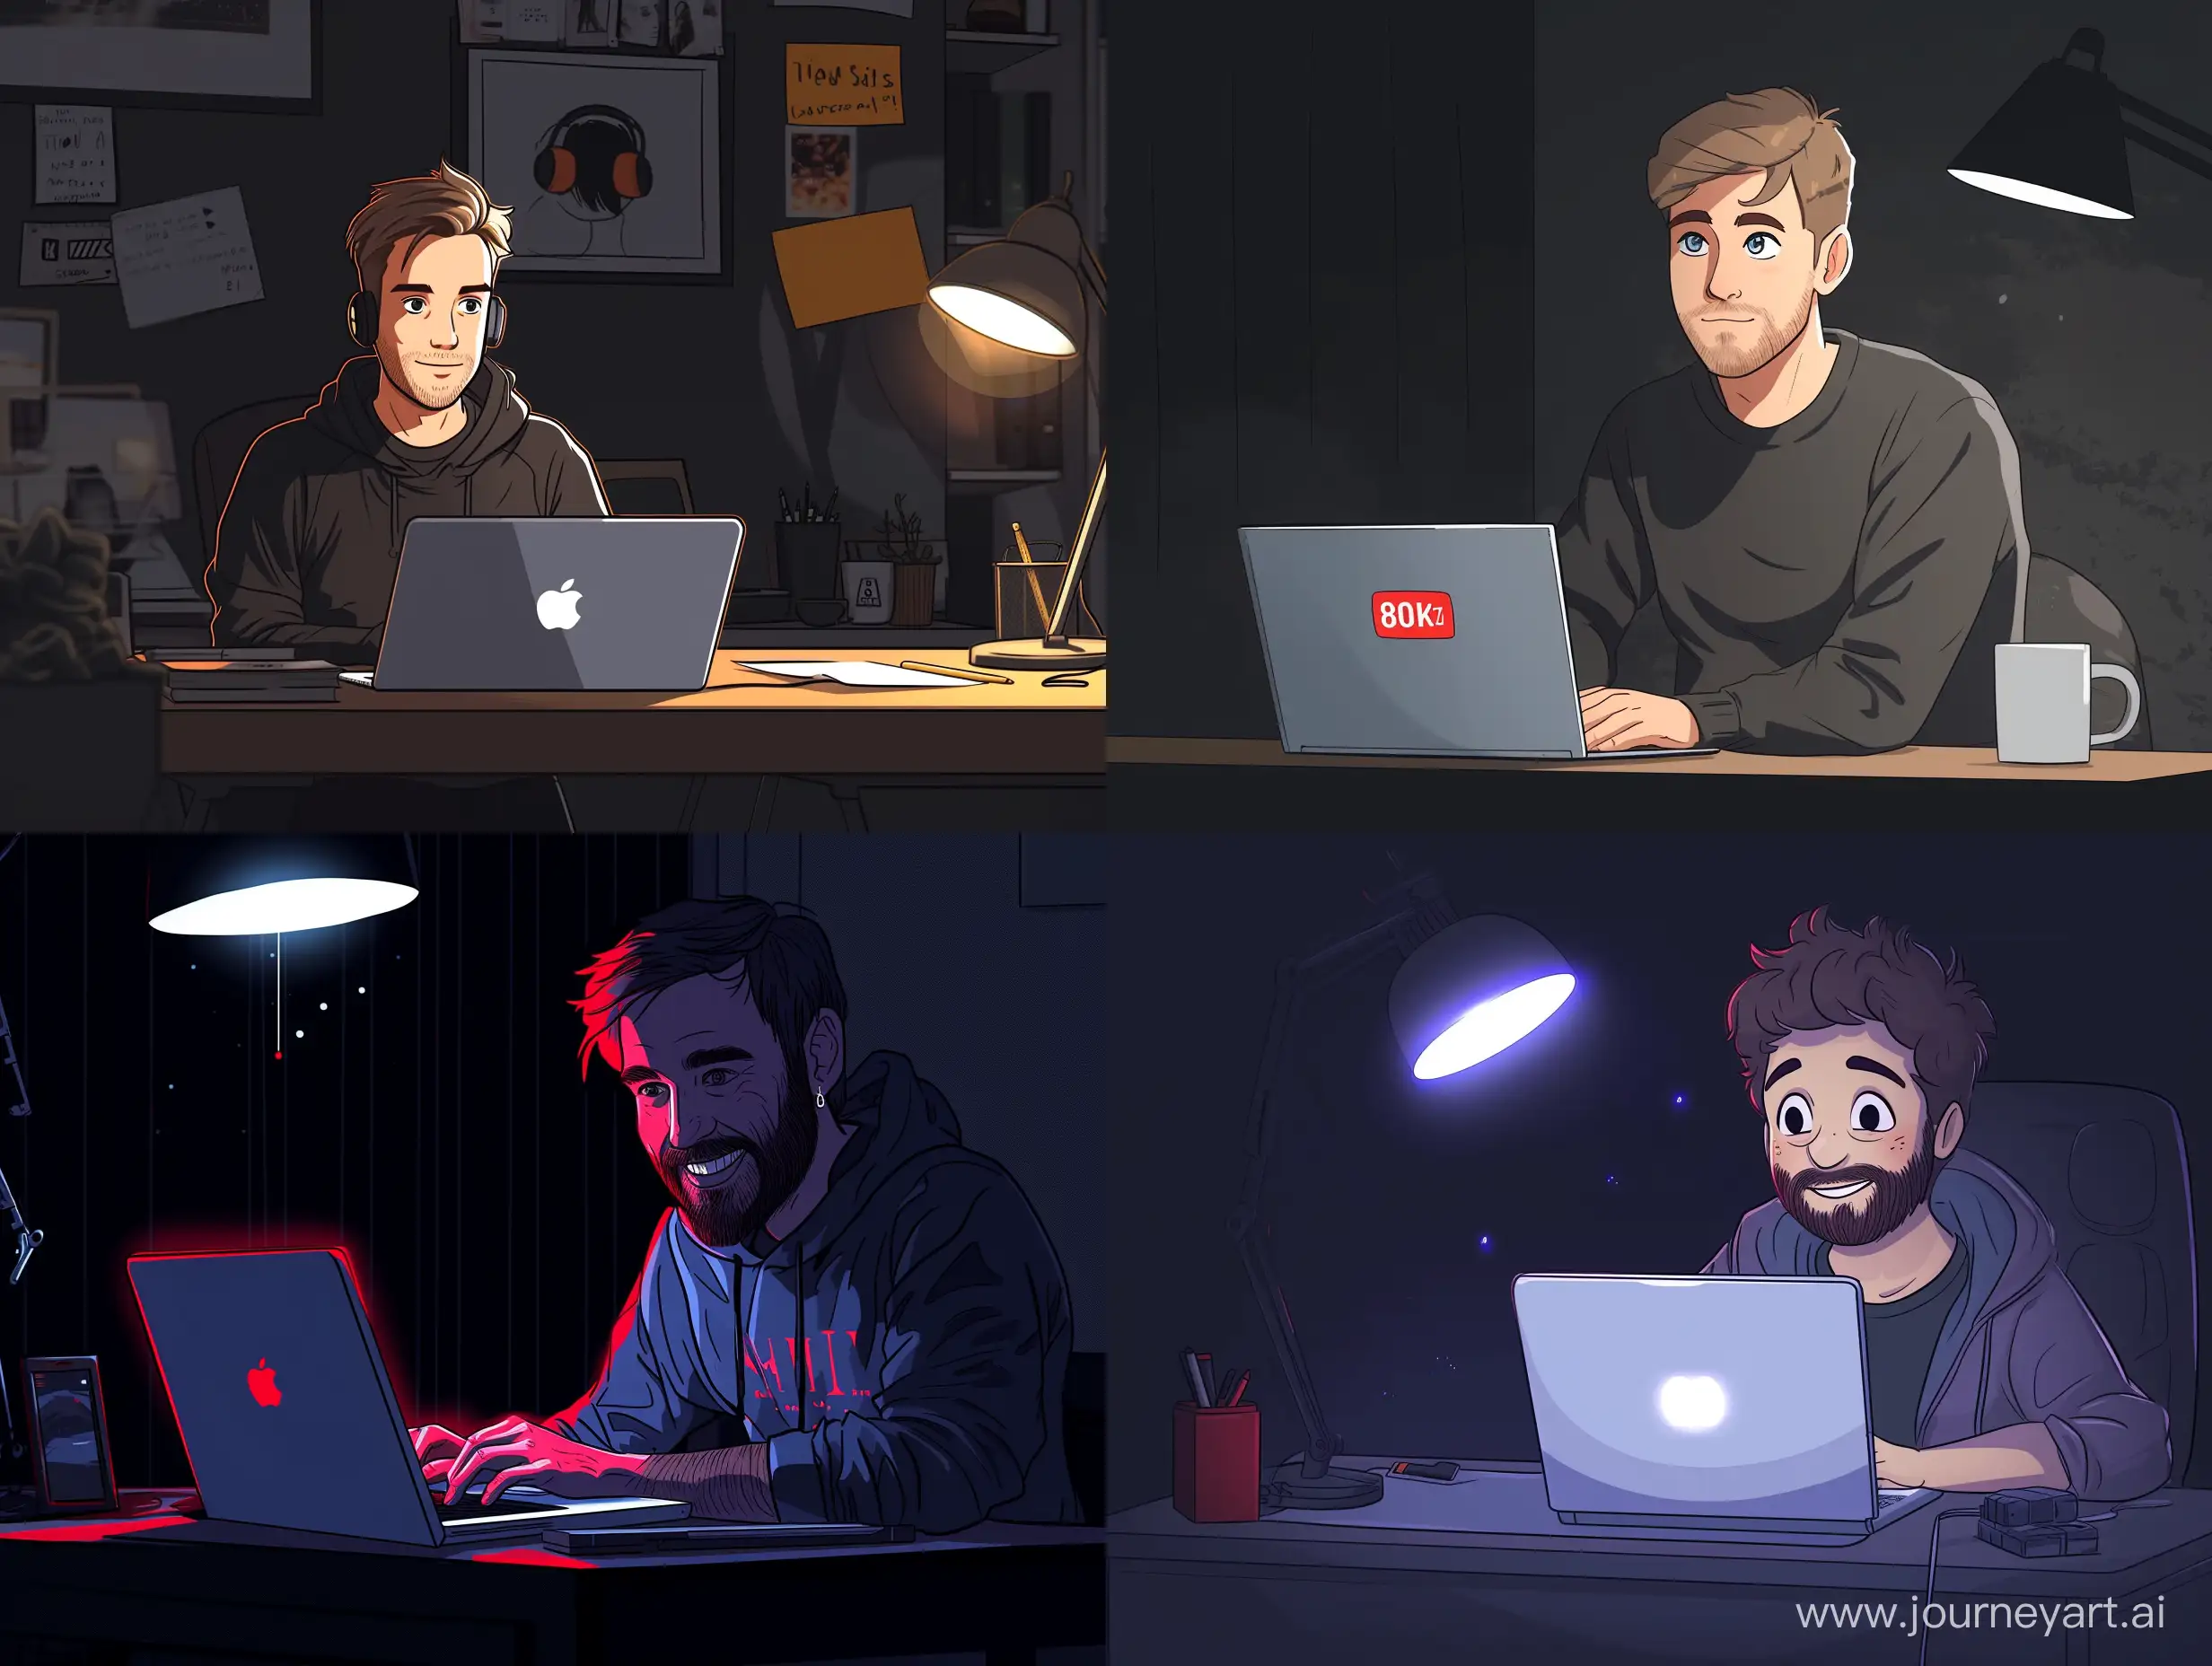 Create a picture of a handsome cartoon YouTuber man, desk, laptop, dark background, art, 8k quality